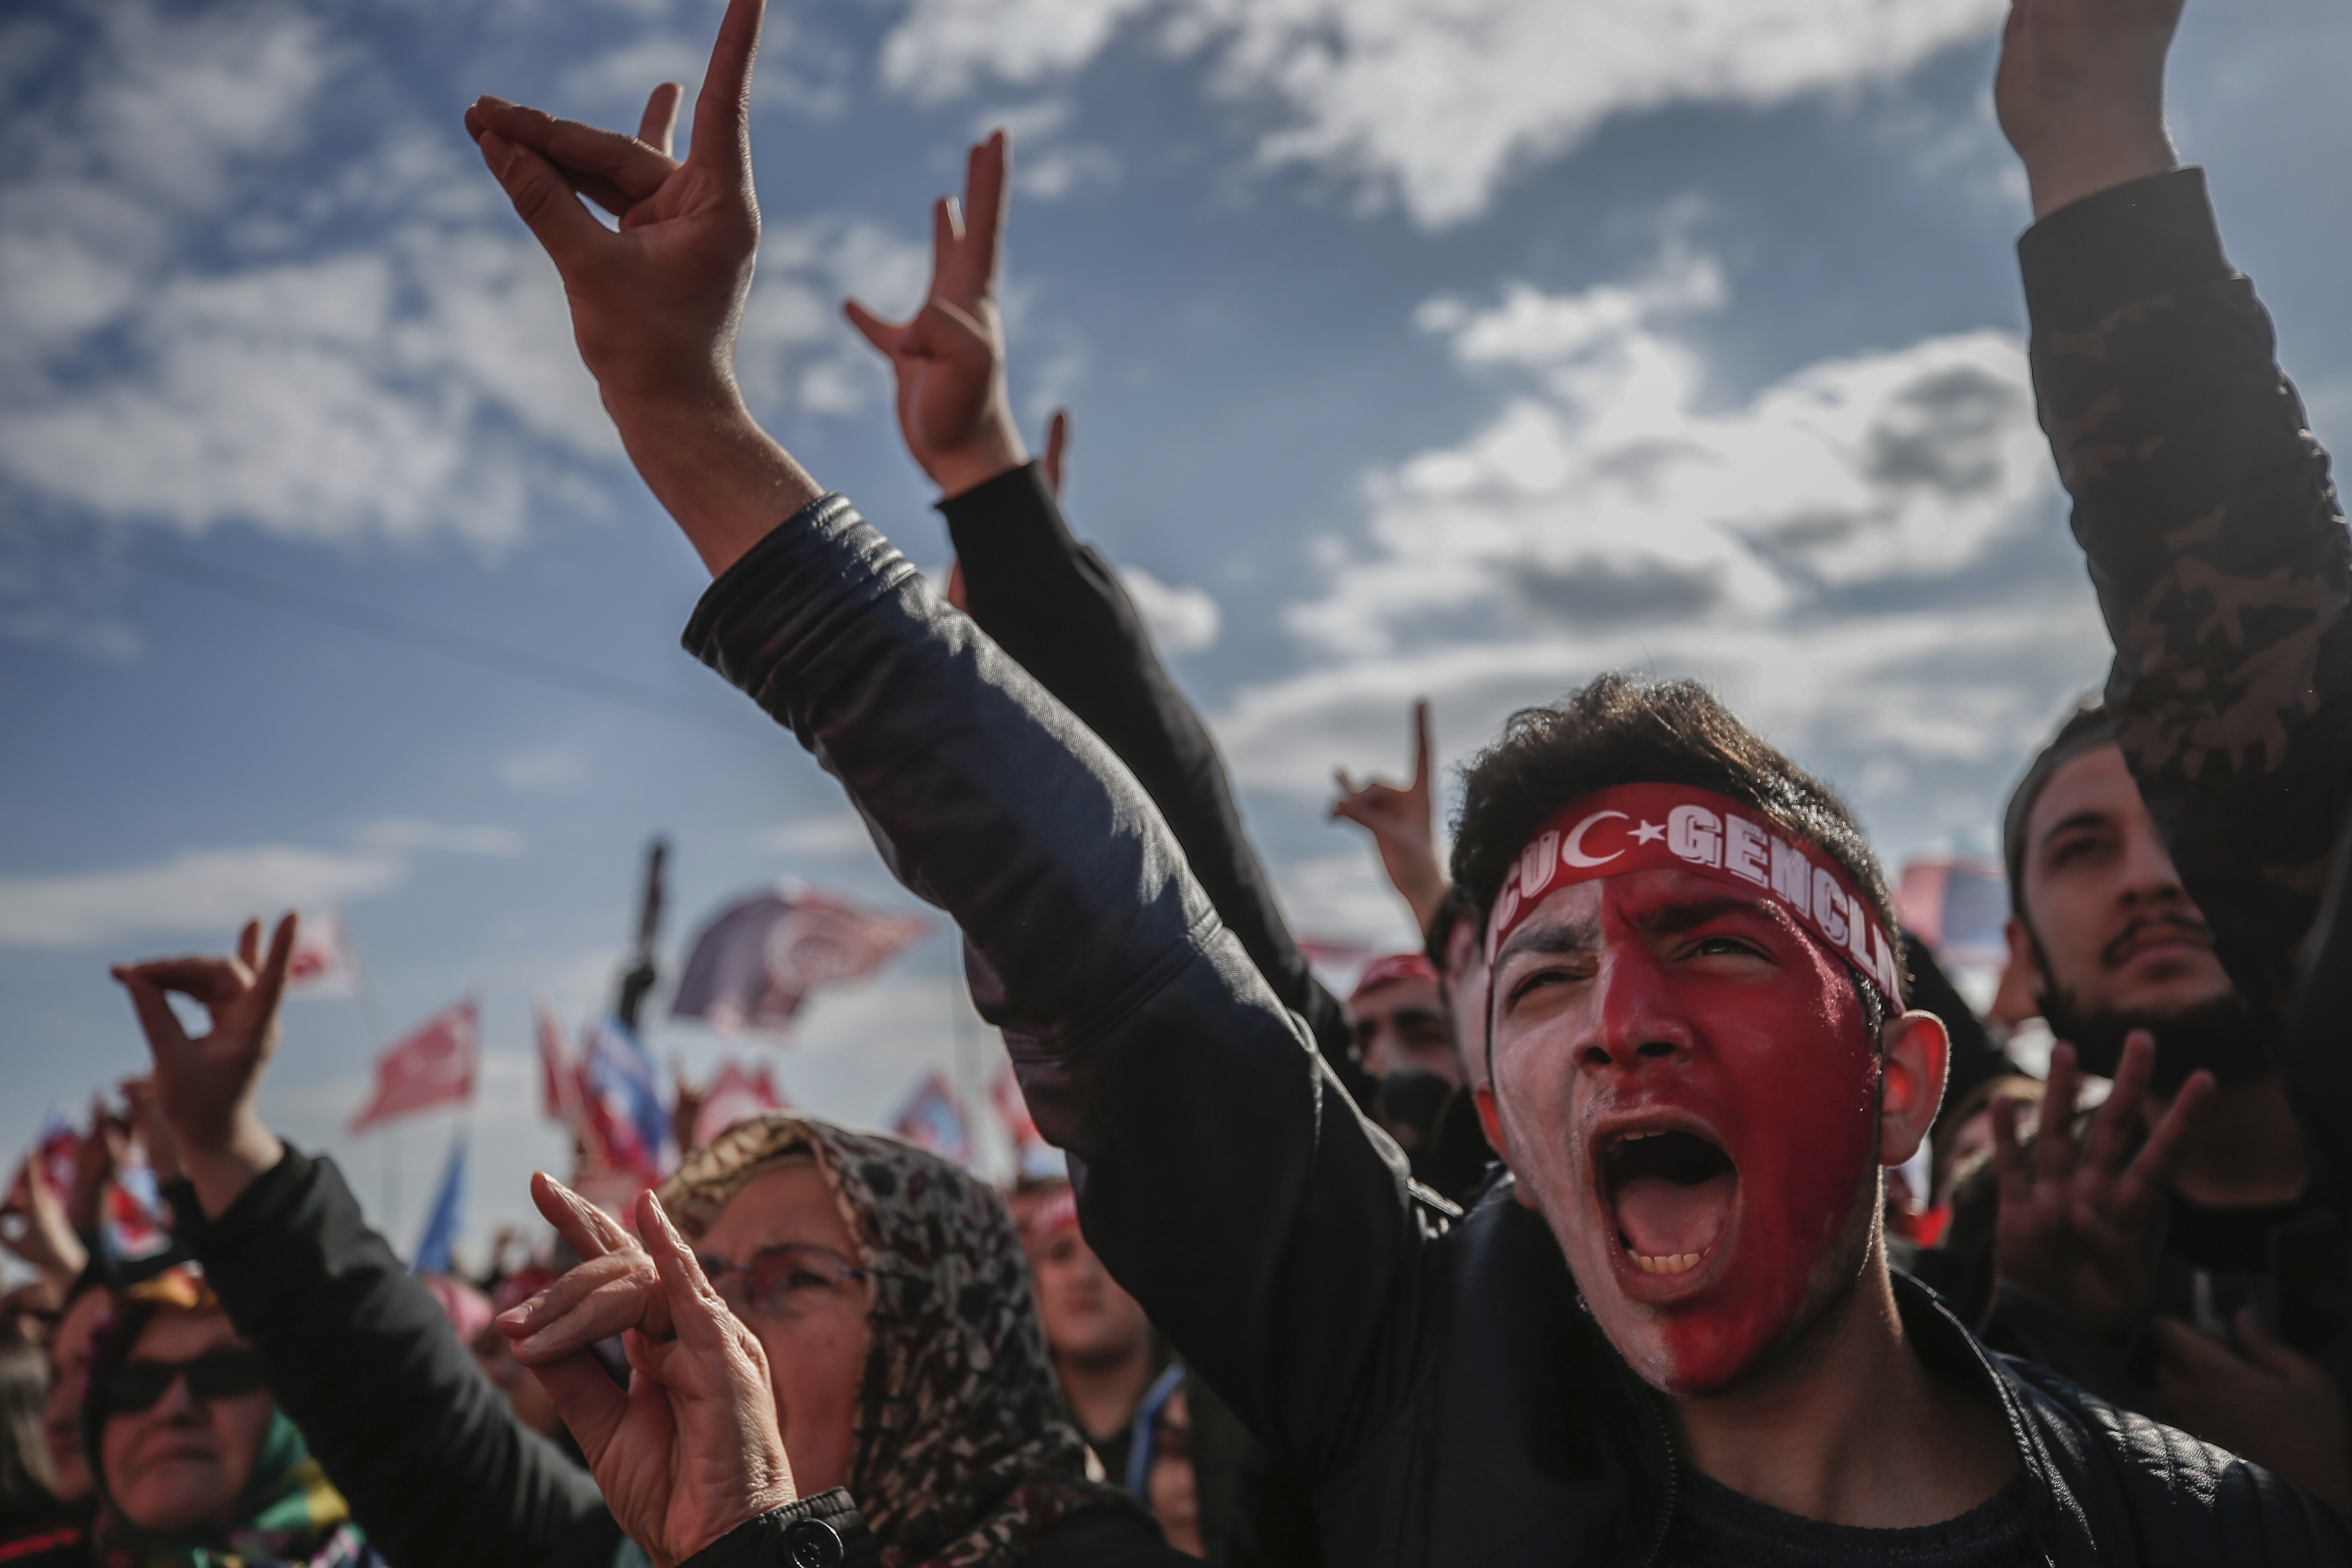 Supporters shout slogans as they listen to Devlet Bahceli, the leader of Turkey's opposition Nationalist Movement Party, who supports President Recep Tayyip Erdogan, during a referendum rally in Istanbul, Sunday, April 9, 2017. Turkey is heading to a contentious April 16 referendum on constitutional reforms to expand Erdogan's powers.(AP Photo/Emrah Gurel)